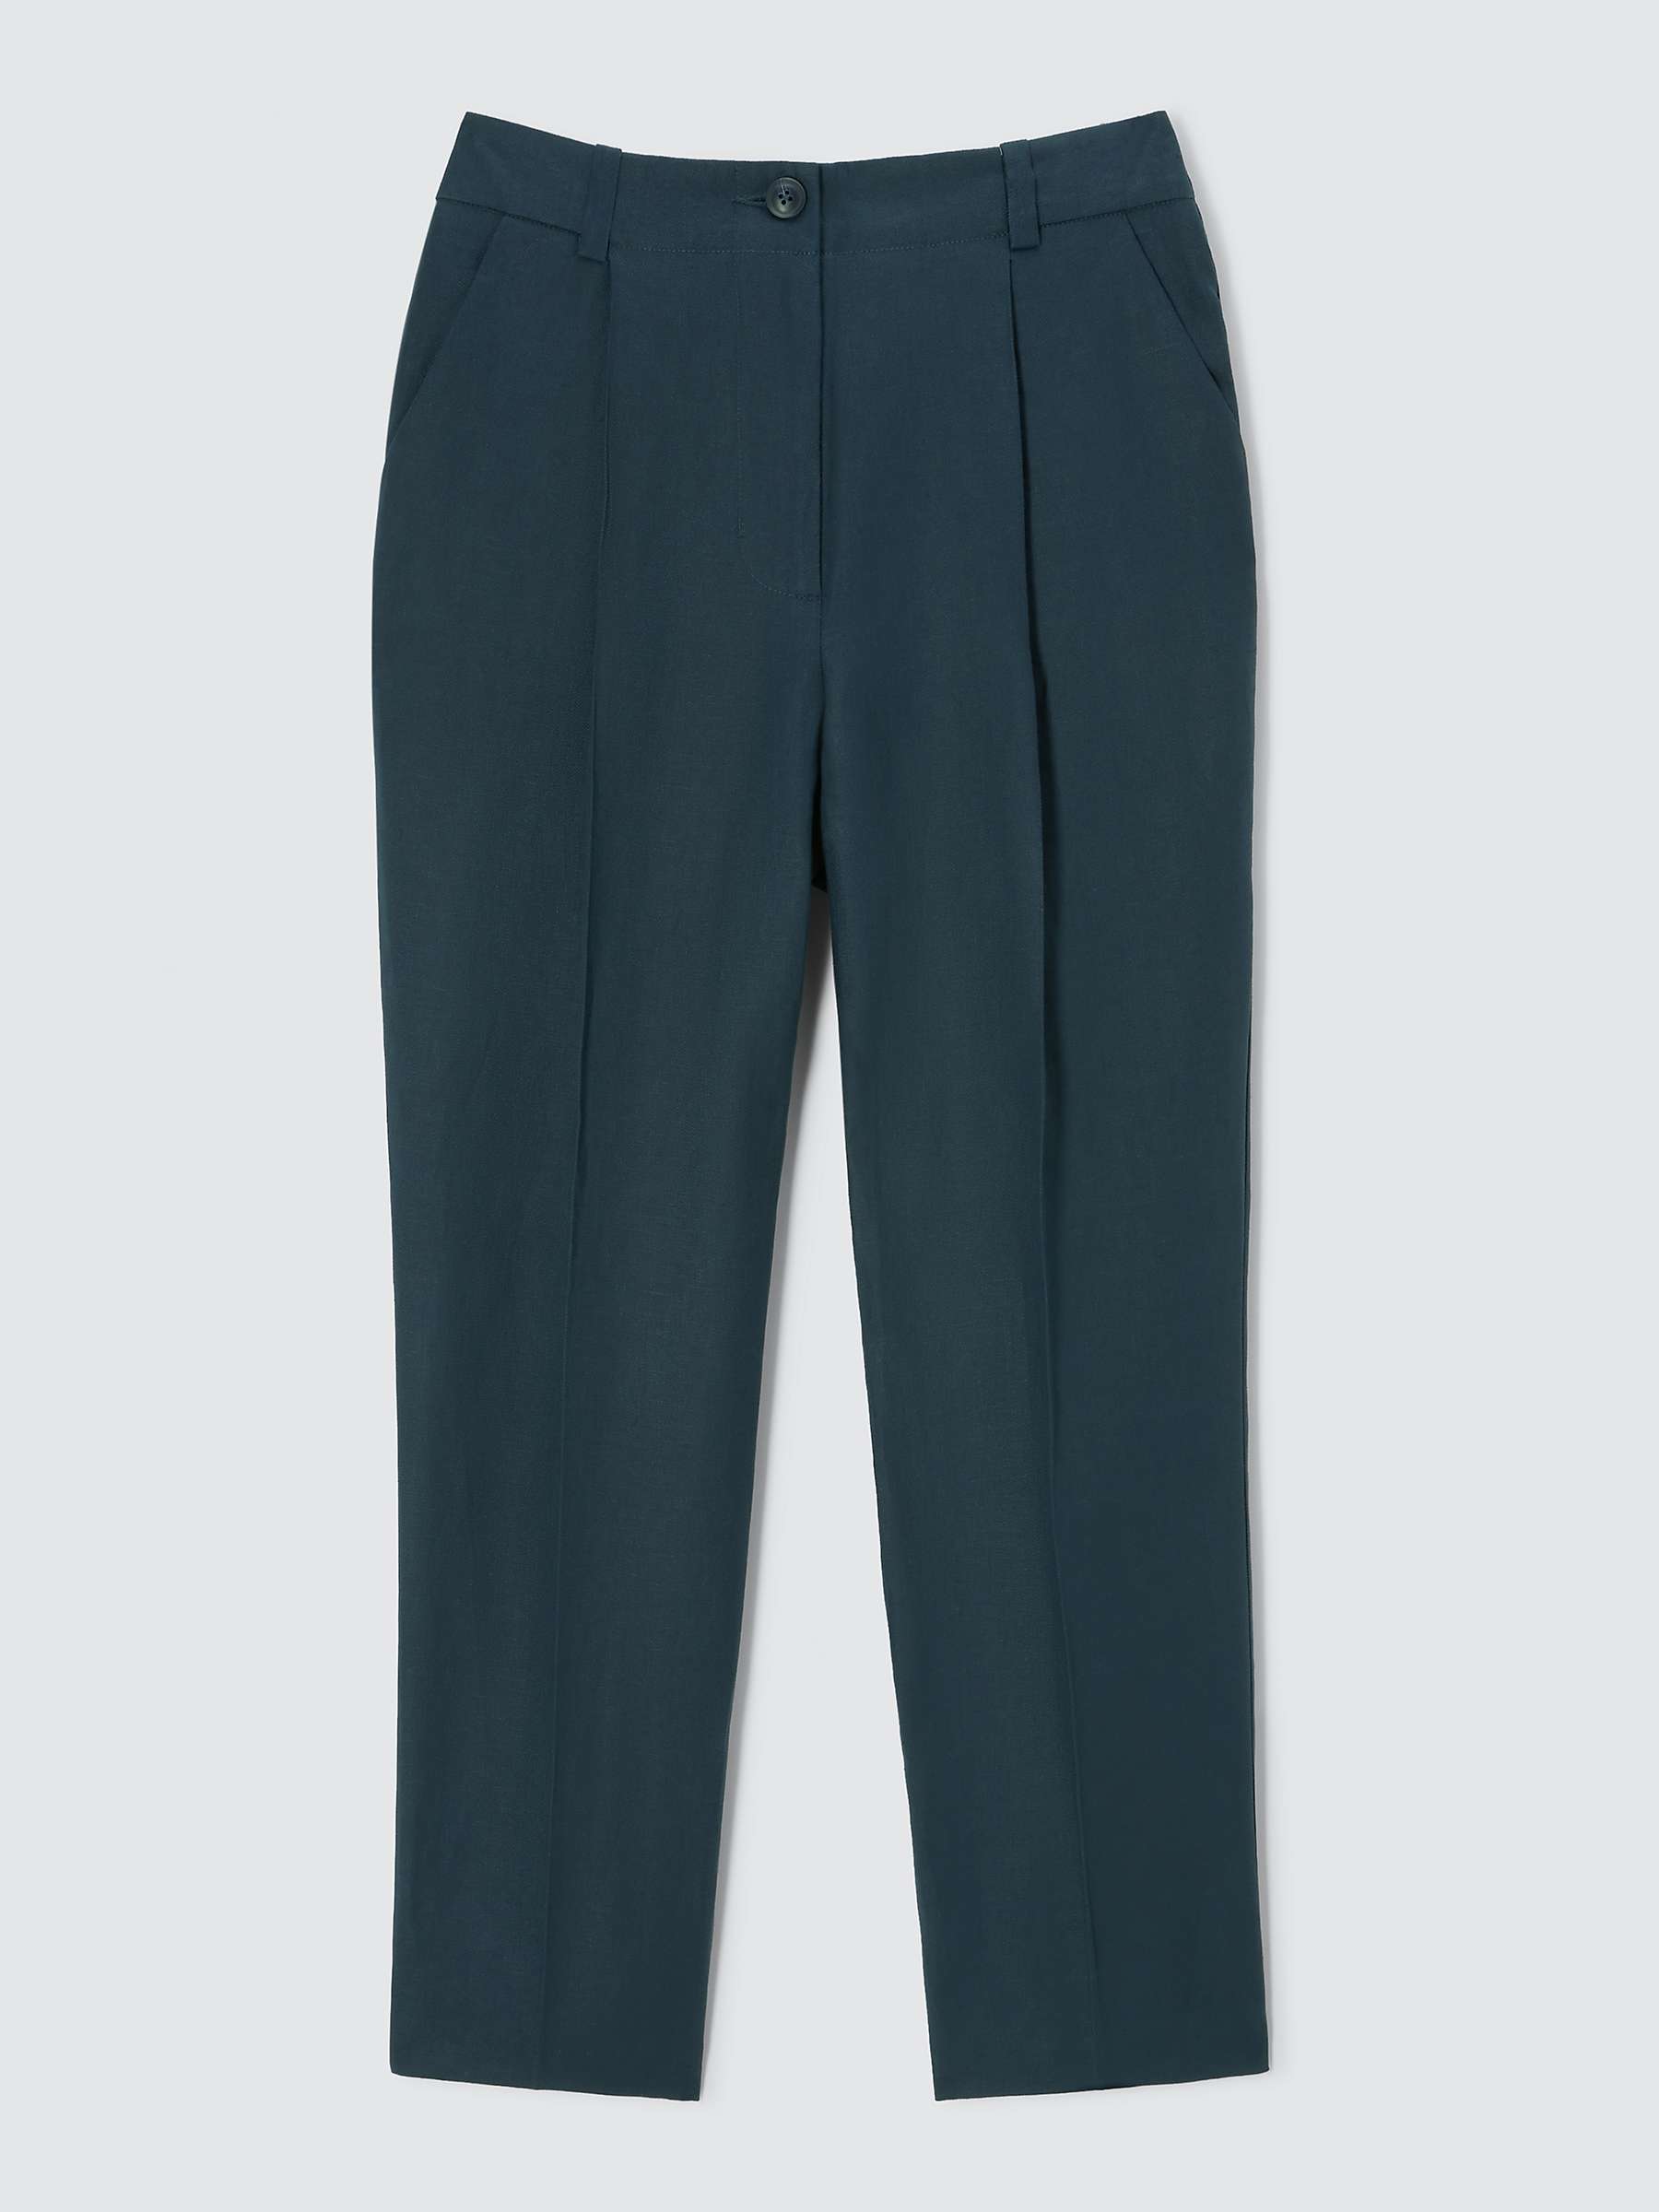 Buy John Lewis Tapered Linen Trousers Online at johnlewis.com